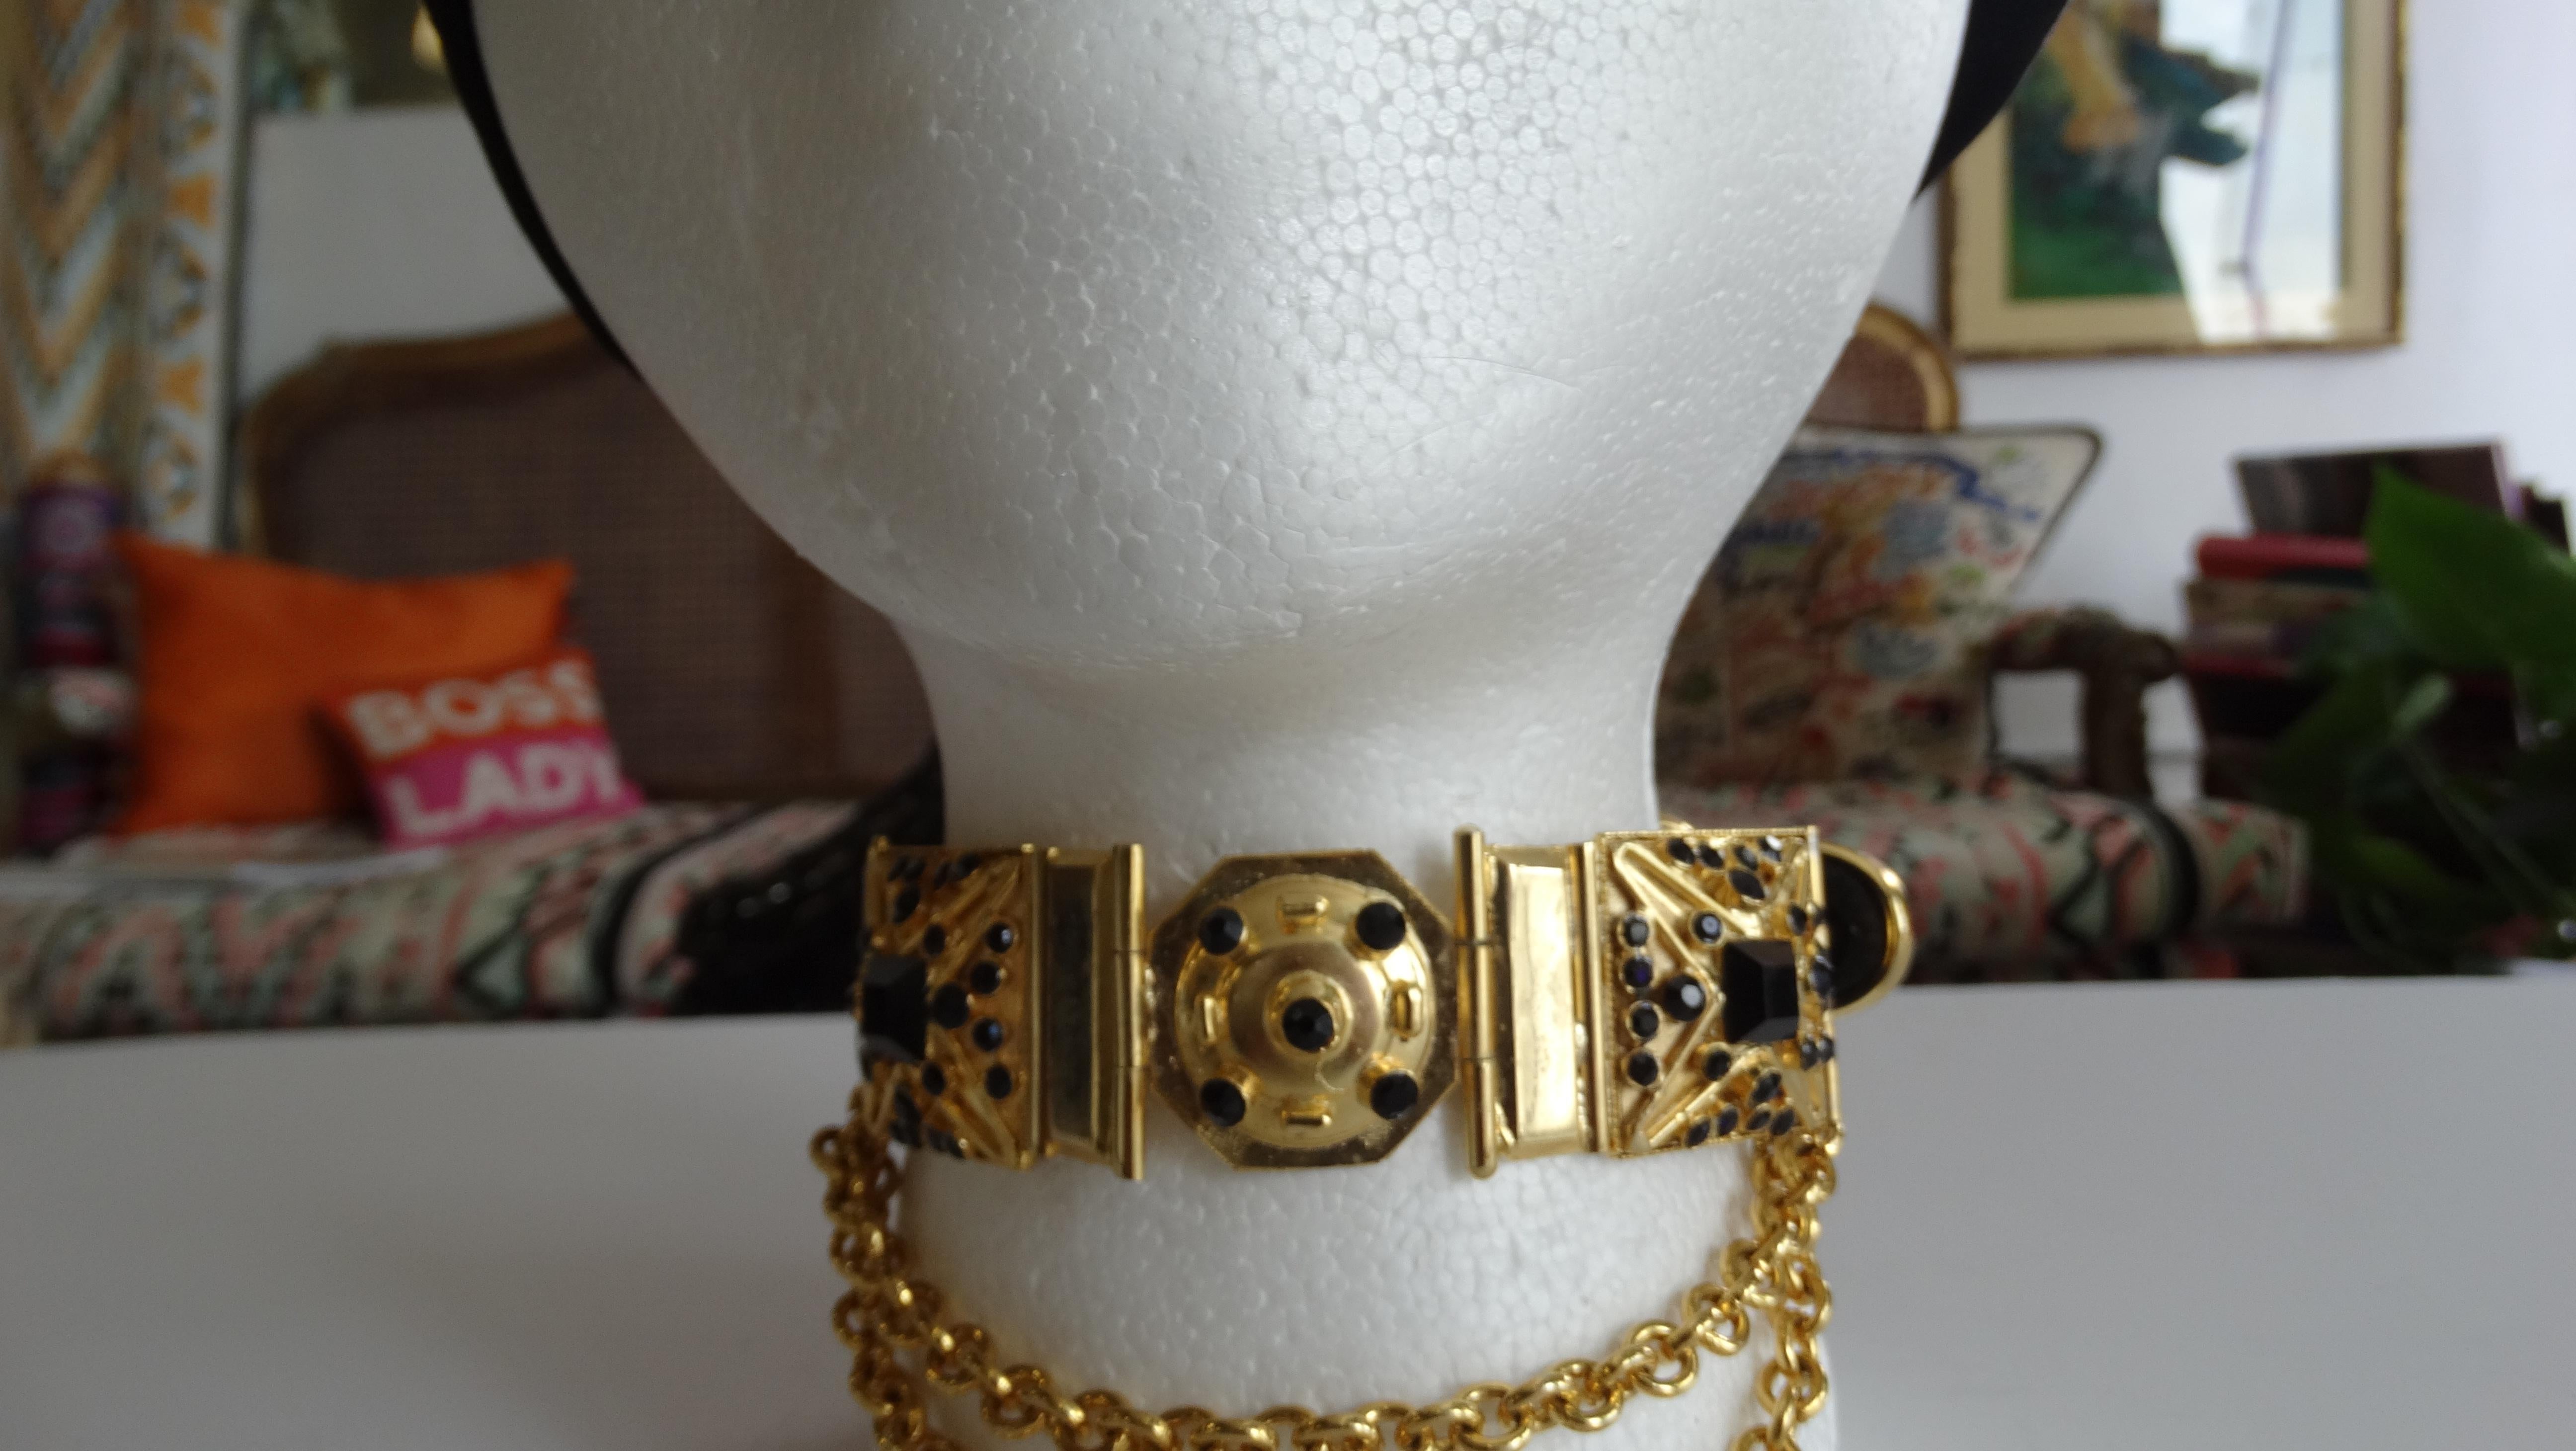 Vintage Versace is always a yes! Circa 1980s, this Gianni Versace gold plated choker includes 3 detailed pendants decorated with blacks rhinestones and a double link chain. Choker features a black suede belt style design and closure. Dress it up or